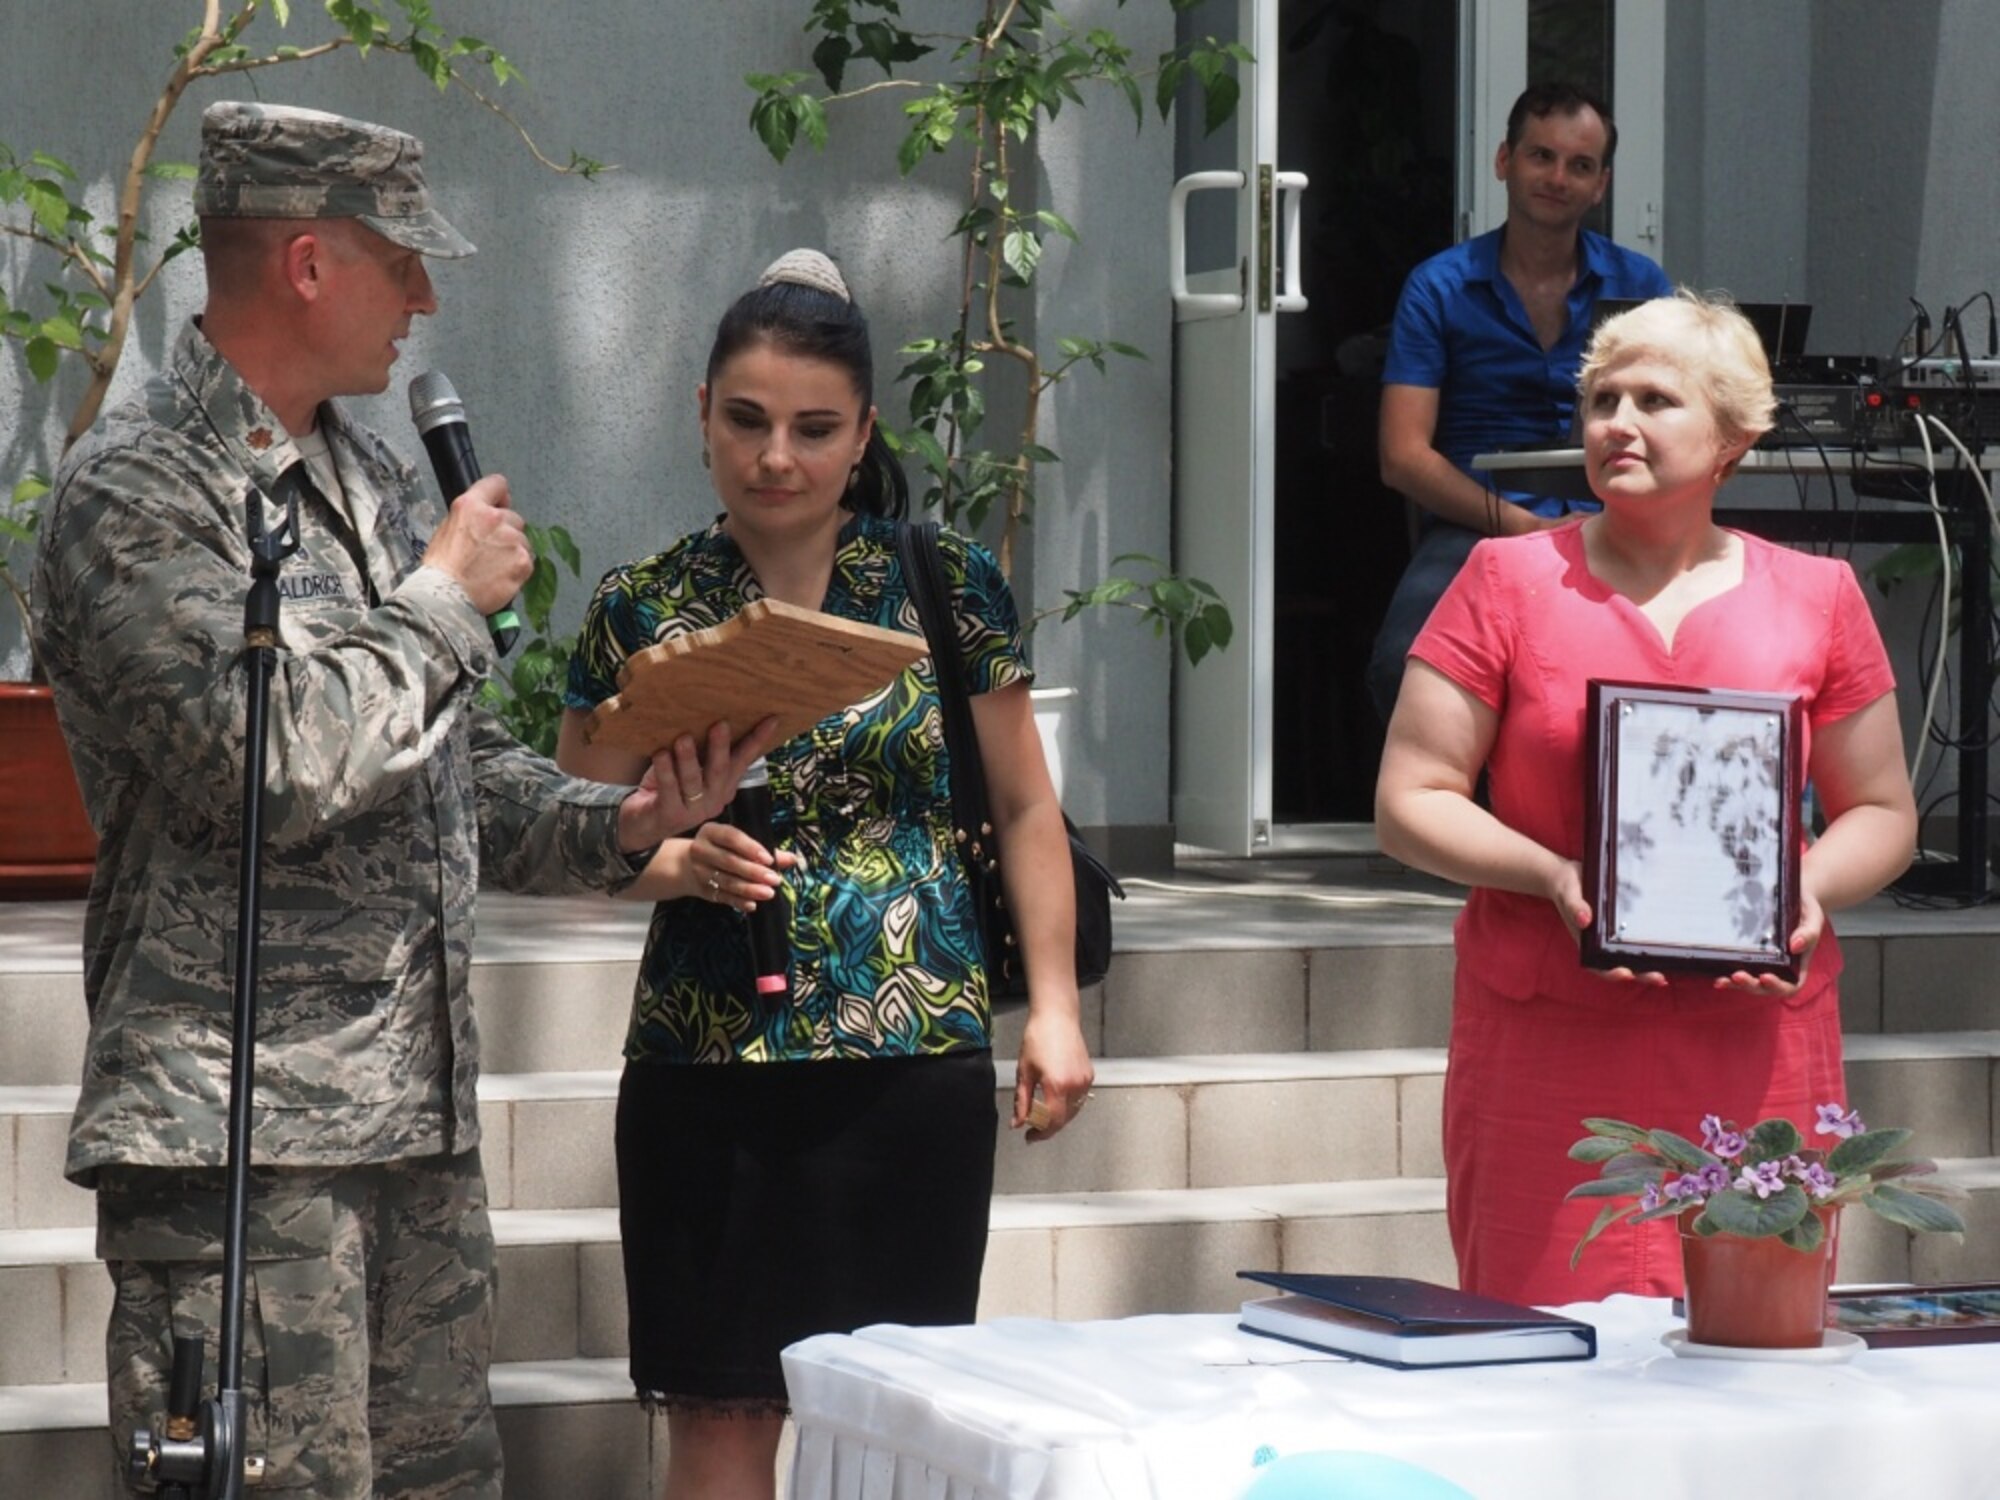 U.S. Air Force Maj. Kristian Aldrich (left), commander of the 185th Engineering Squadron, Iowa Air National Guard, presents a plaque to Nina Rusu (right), the principal of Special School Number 12, during a ceremony in Chisinau, Moldova, June 23, 2016. As part of the European Command’s (EUCOM) Humanitarian and Civic Assistance Program, the 123rd Civil Engineering Squadron from the Kentucky Air National Guard, 185th Engineering Squadron from the Iowa Air National Guard, 457th Civil Affairs Battalion and Moldovan Land Forces collaborate to renovate to the kitchen at Special School Number 12 for Hearing Impaired Children, in Chisinau, Moldova, June 3-25, 2016. (U.S. Army Photo by Pfc. Emily Houdershieldt/released) 